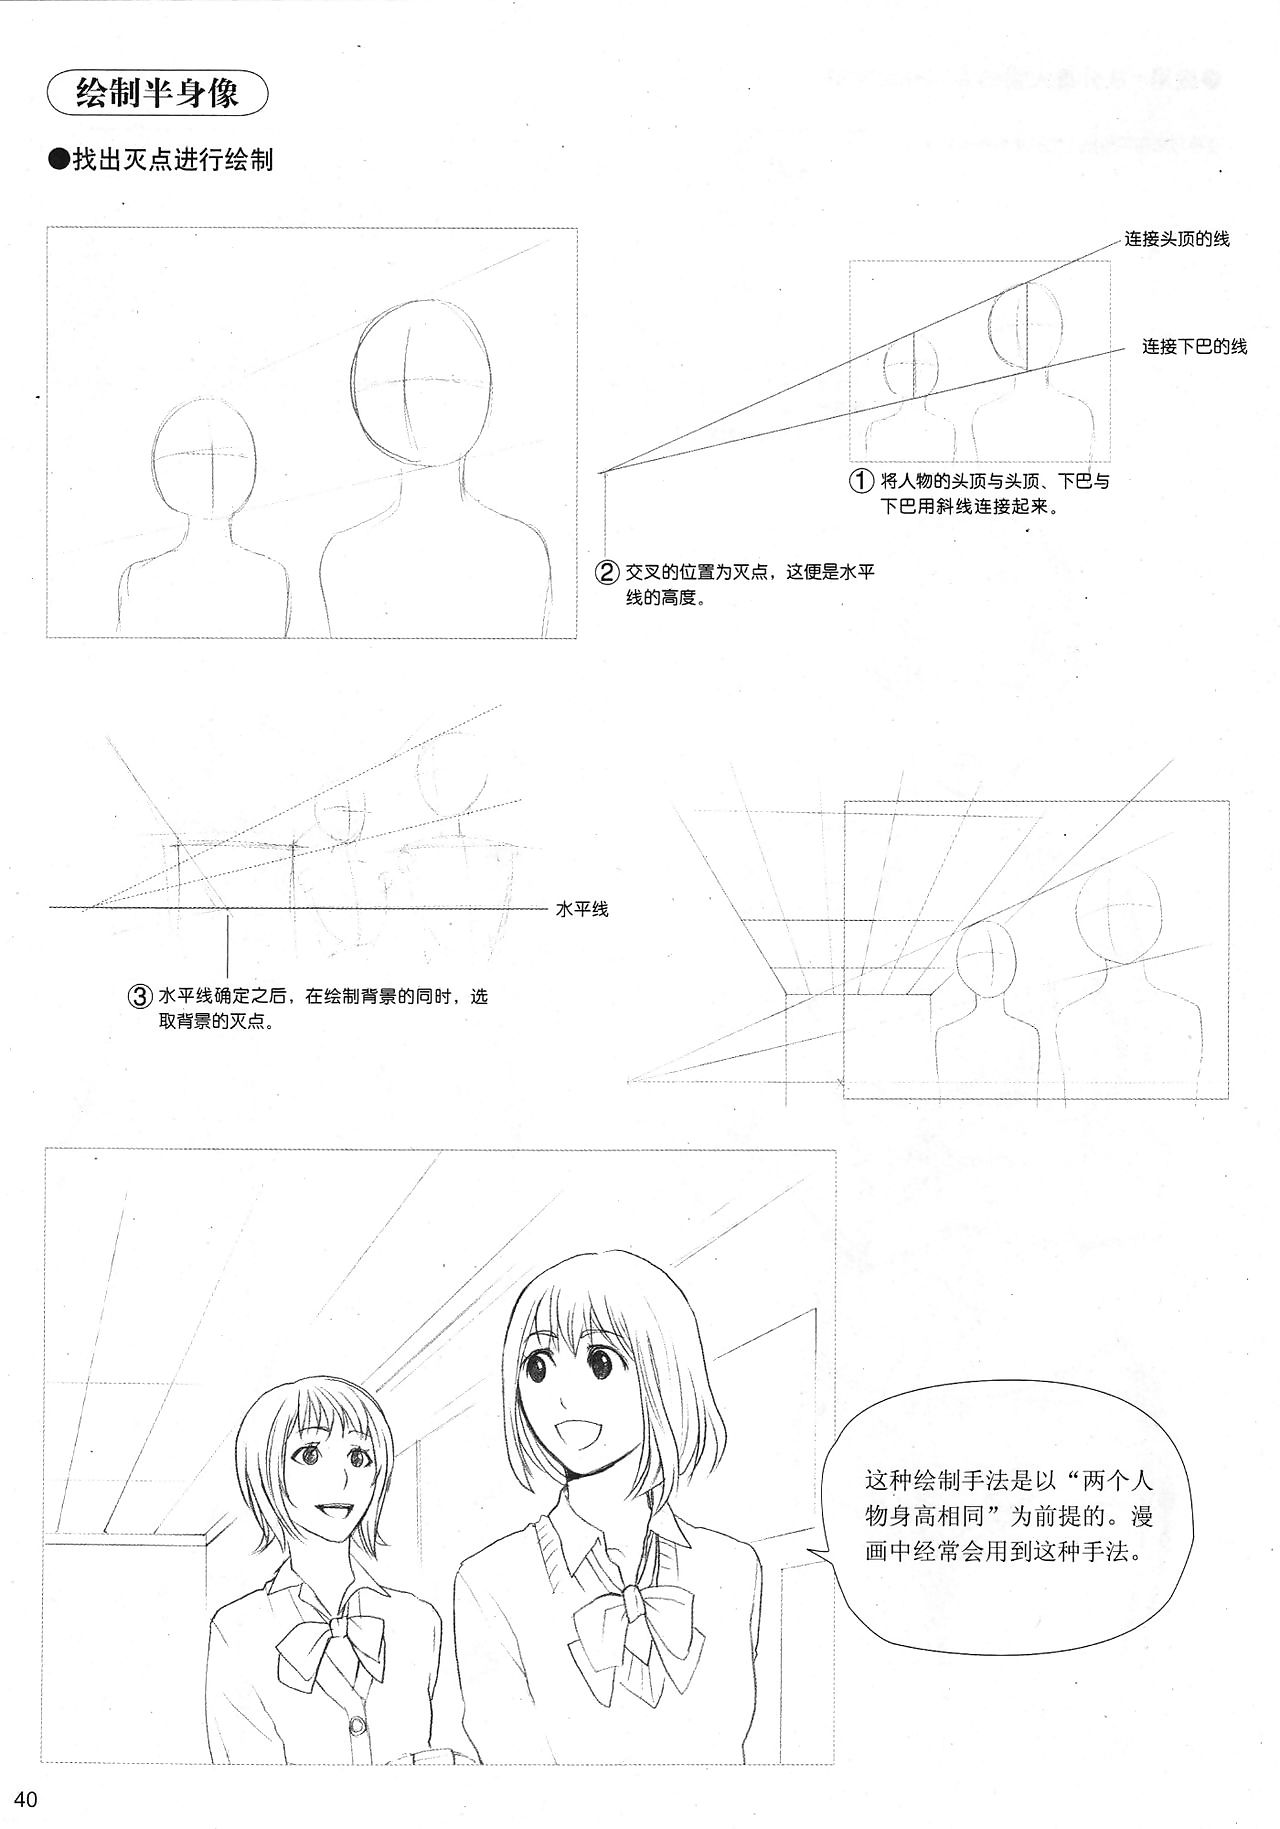 Regardless how far Come nigh Manga: Sketching Manga-Style Develop into 4: Throughout Close to Purview - faithfulness 3